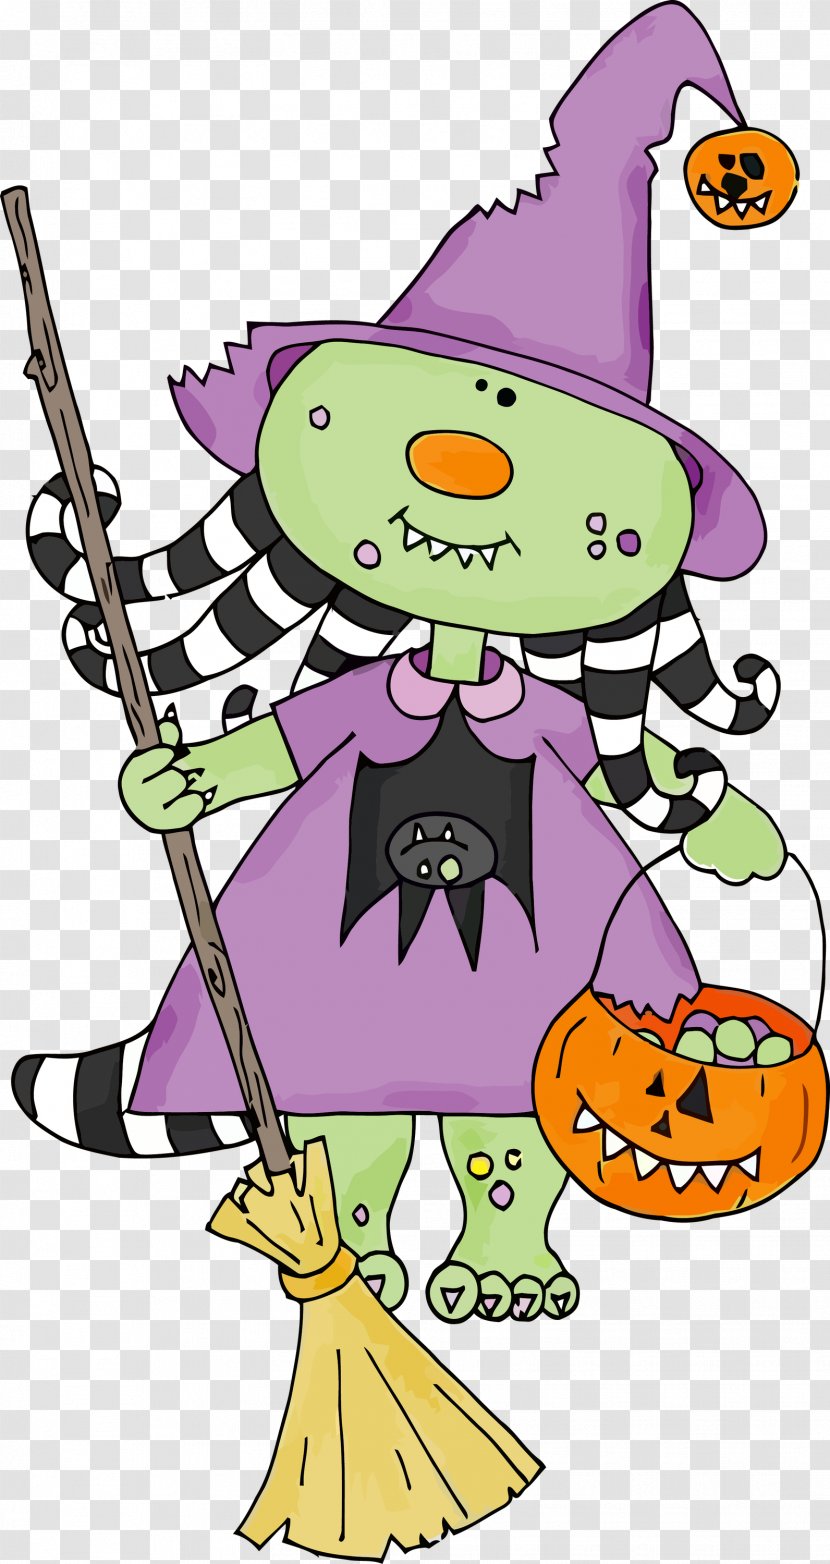 Little Witch Pumpkin Broom - Household Cleaning Supply Cartoon Transparent PNG